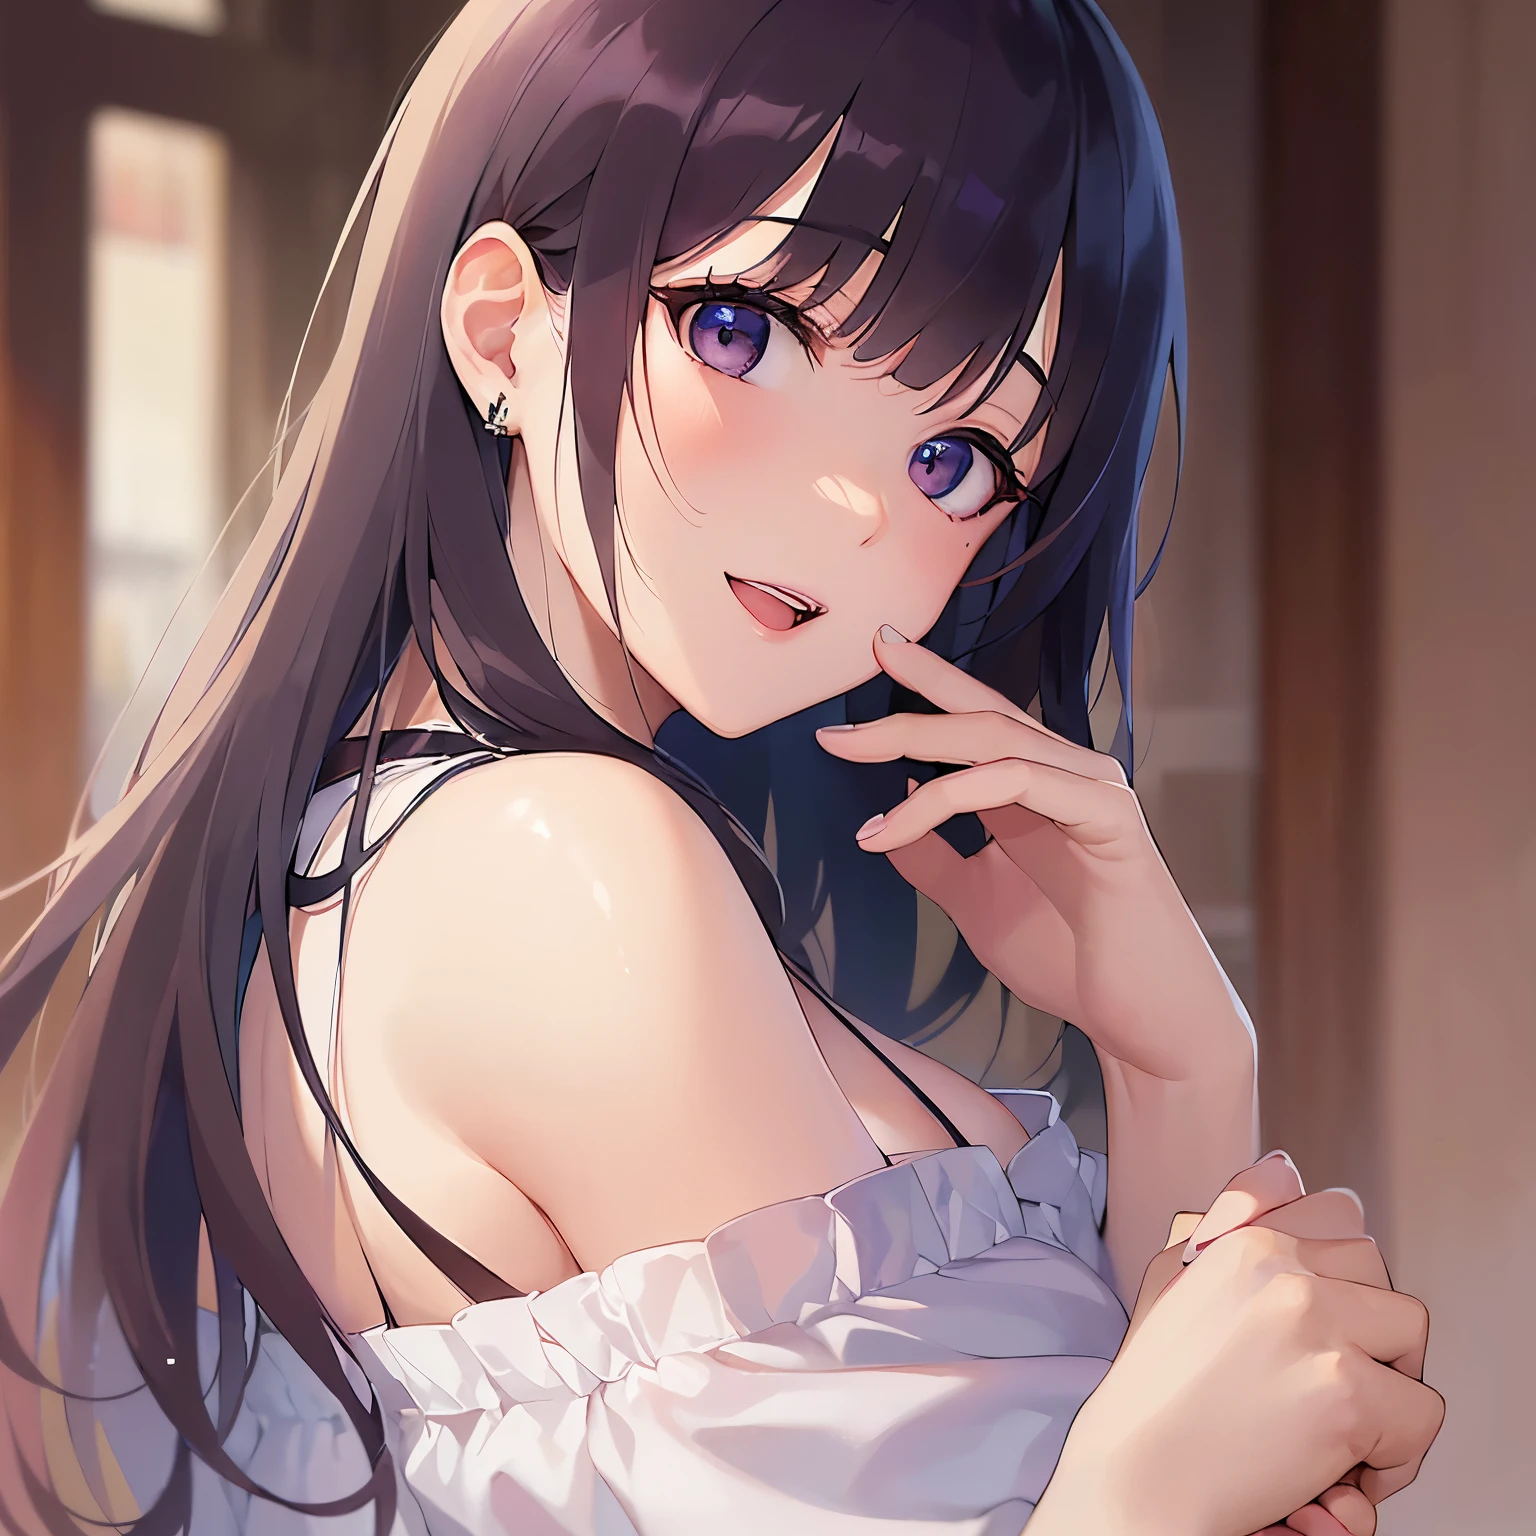 (looking back:1.5), (Clasping own hands:1.3), Realistic, real person, RAW photo, photorealistic, portrait photography, shiny skin, japanese idol、(A 20-year-old woman with black bangs and purple eyes.) and (blunt bangs) and (straight midium hair), cleavage, (She is wearing a white off-shoulder blouse.:1.5)、(smile:1.2), open mouth, Alone、staring at、Background outside、Are standing